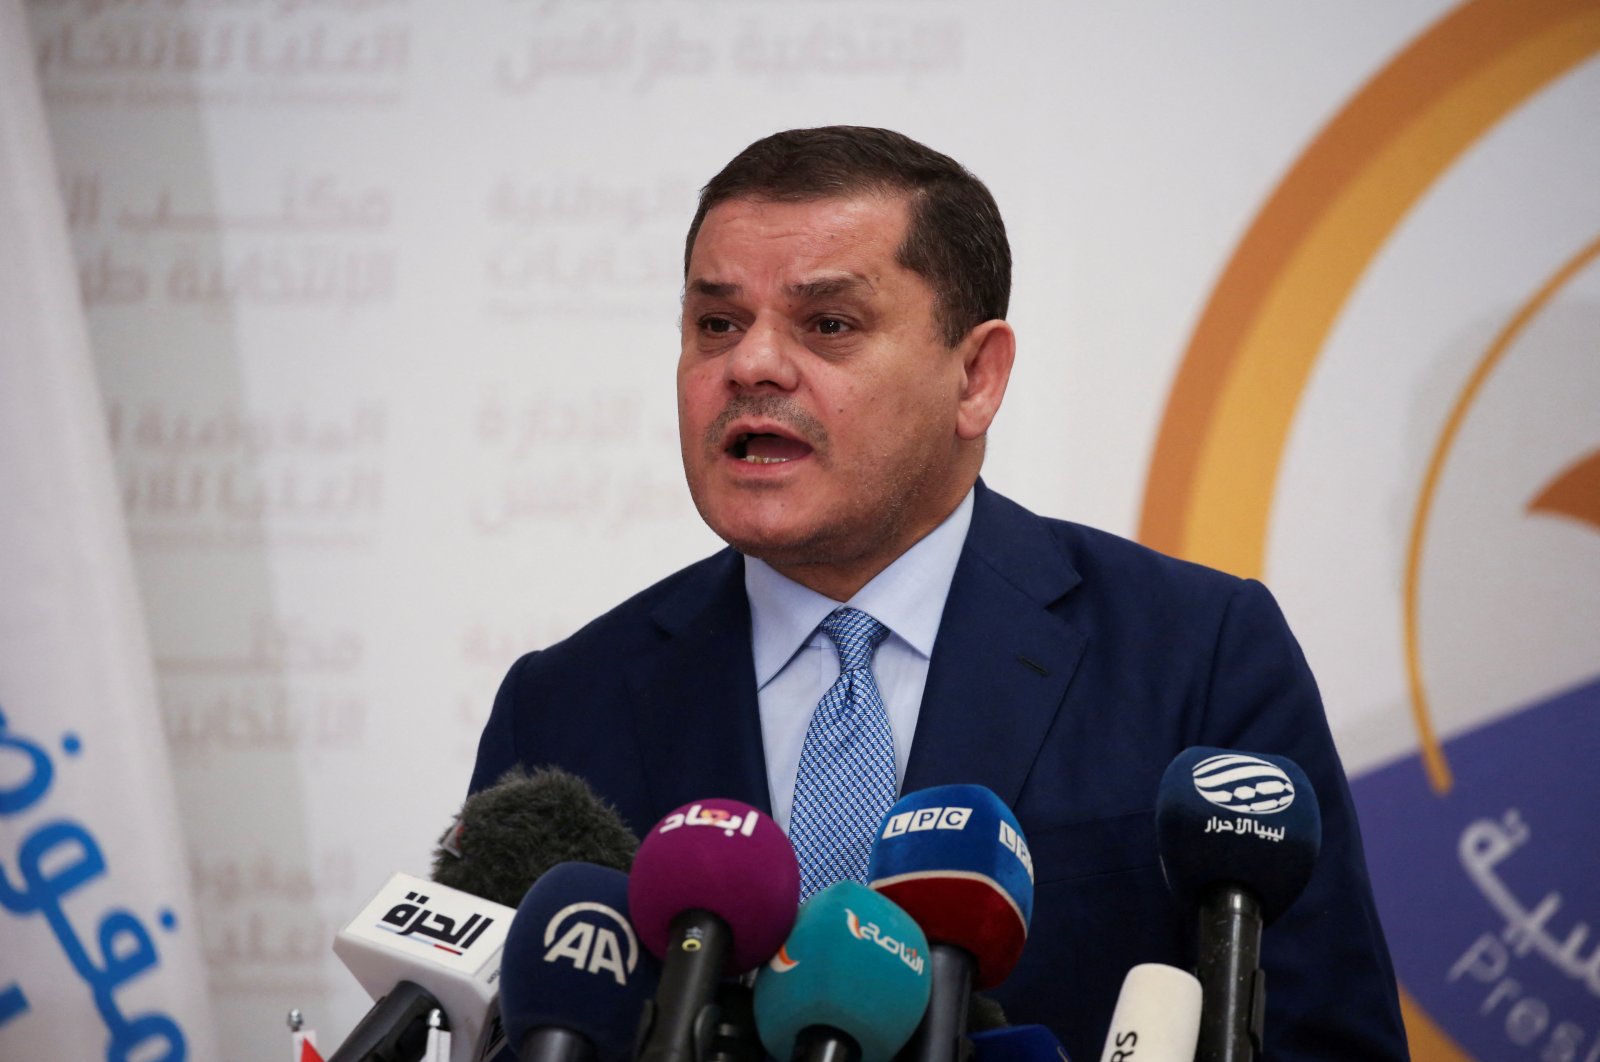 Libyan Prime Minister Dbeibah is urging the government to continue the work